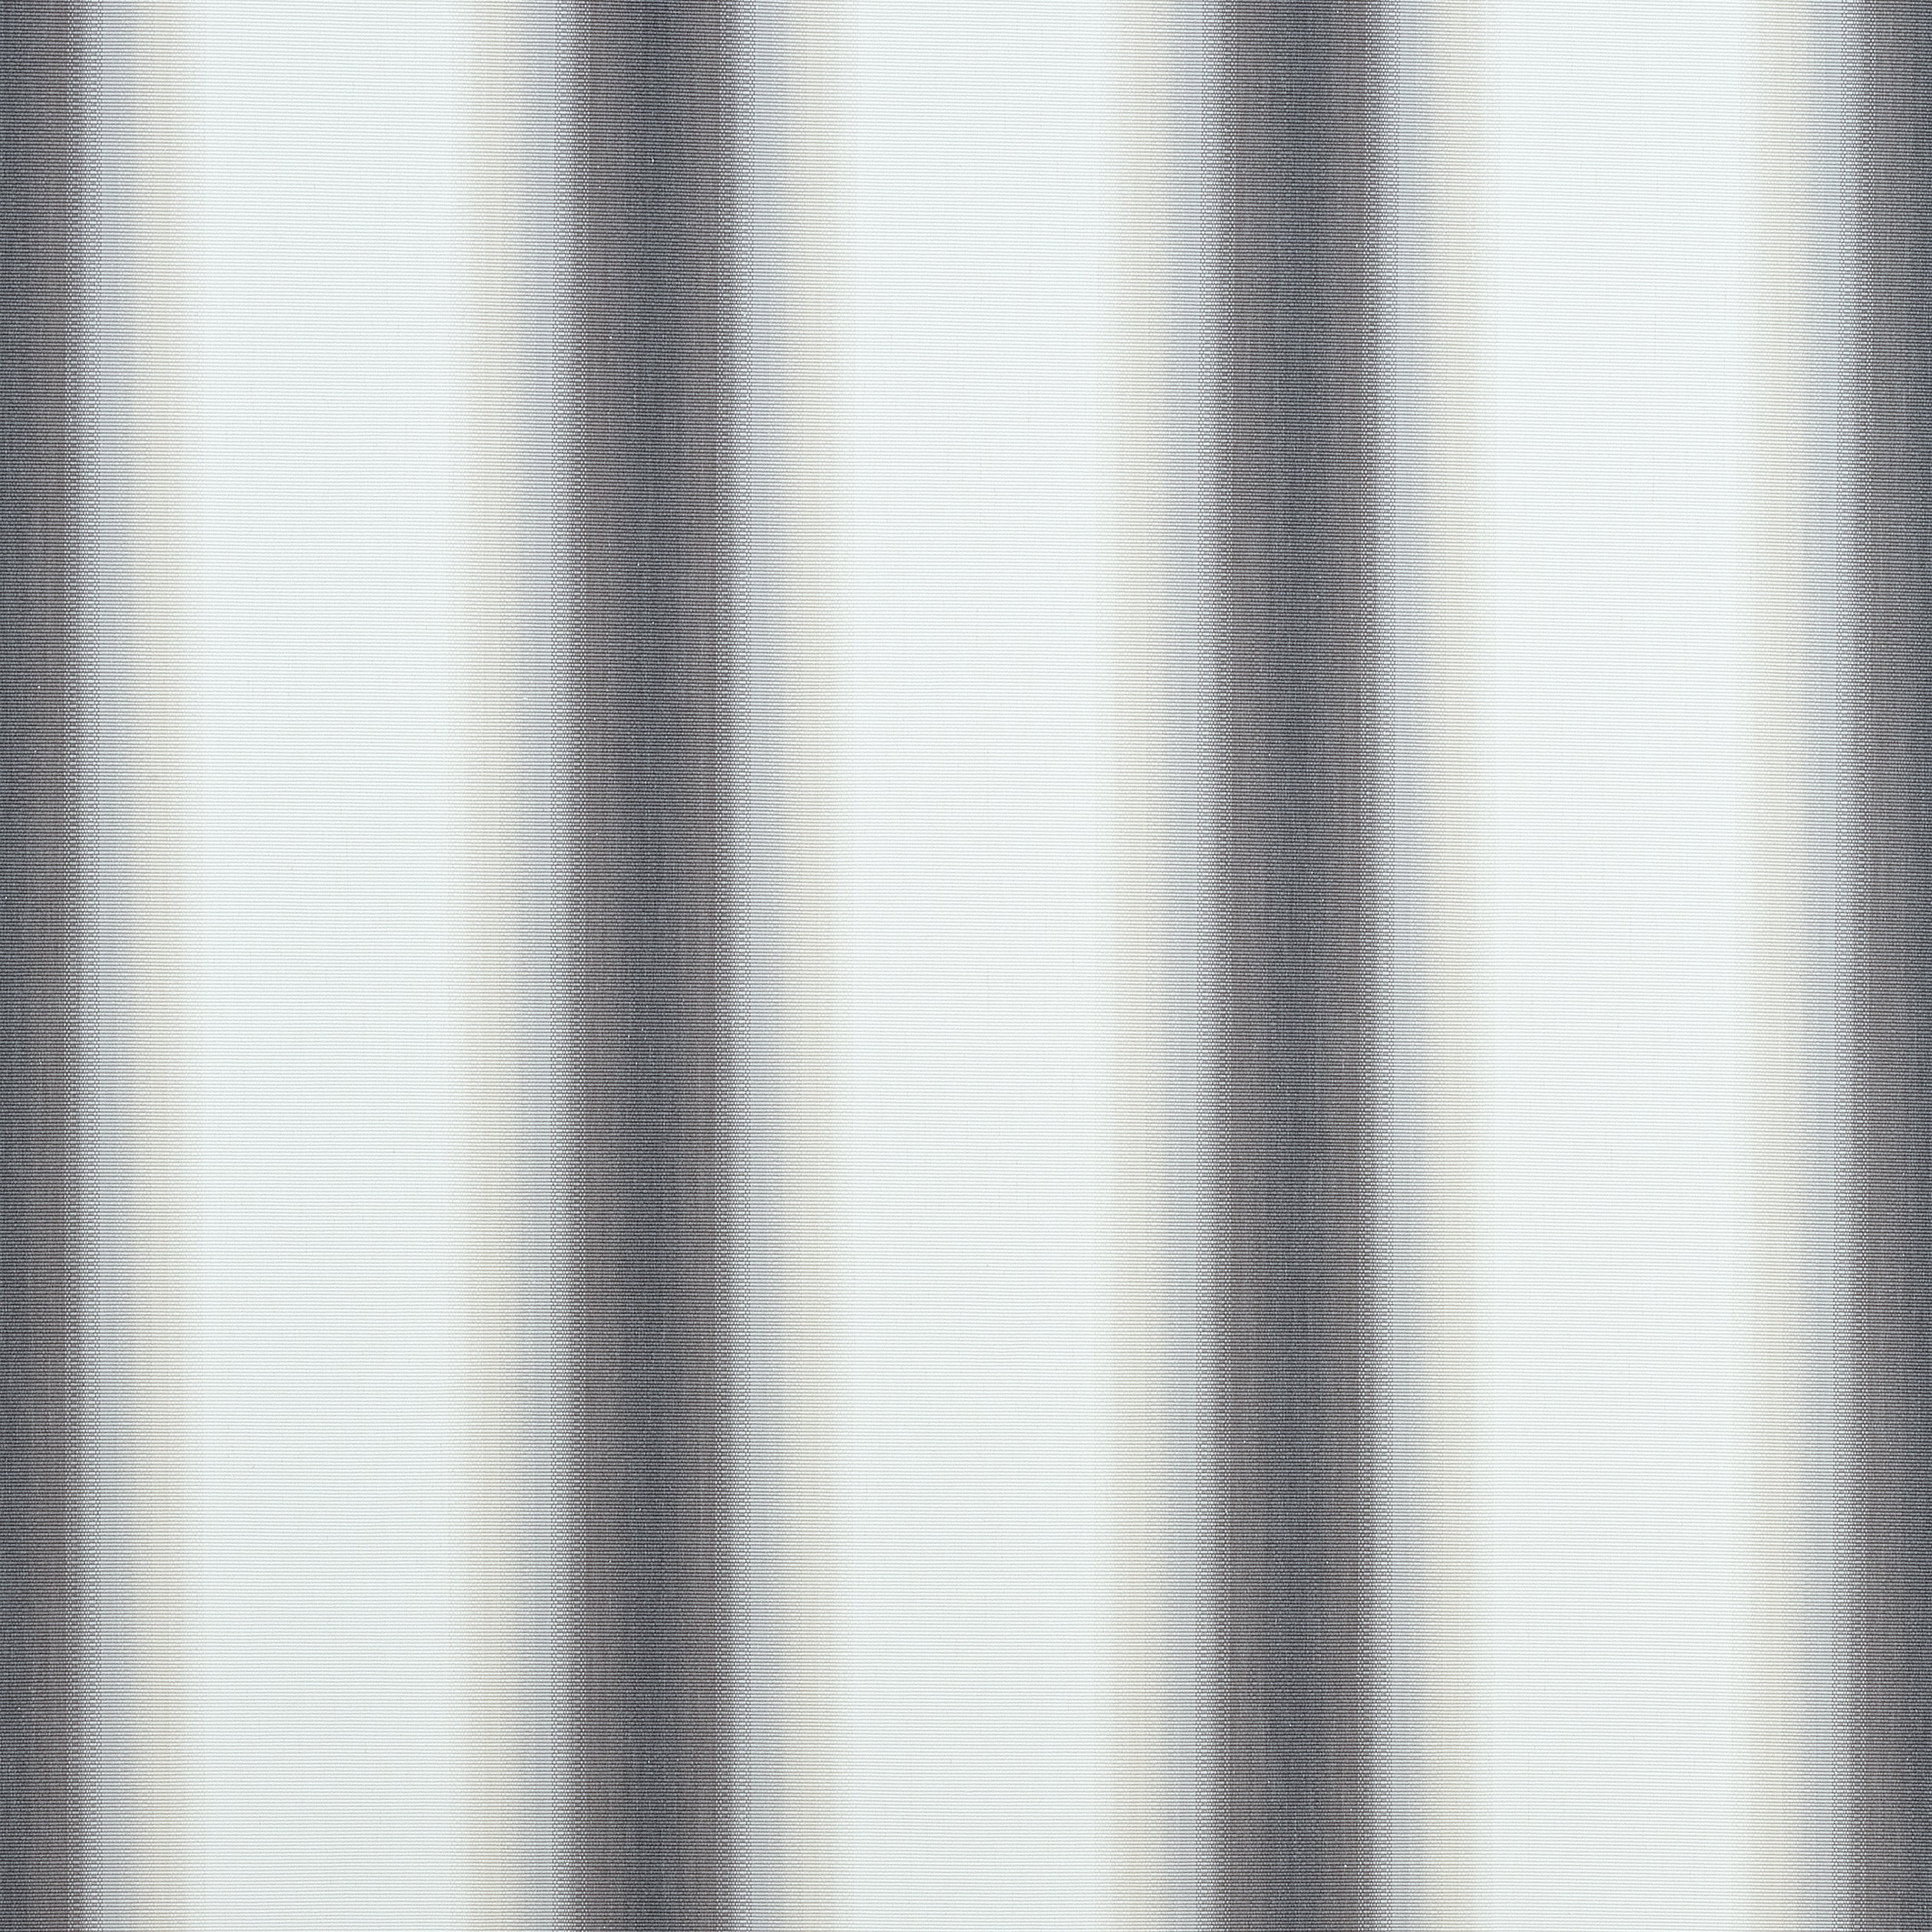 Stockton Stripe fabric in grey color - pattern number W775494 - by Thibaut in the Dynasty collection